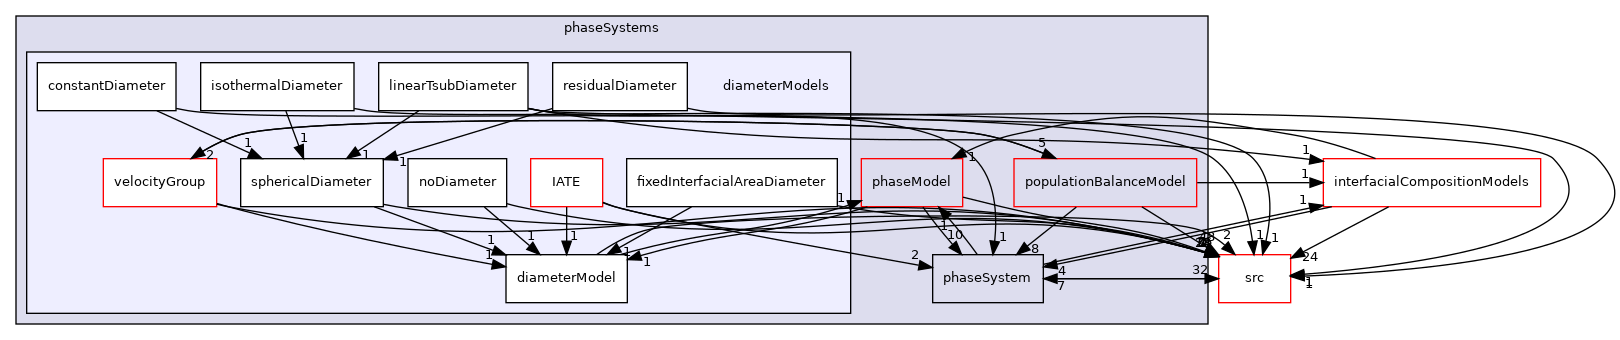 applications/modules/multiphaseEuler/phaseSystems/diameterModels